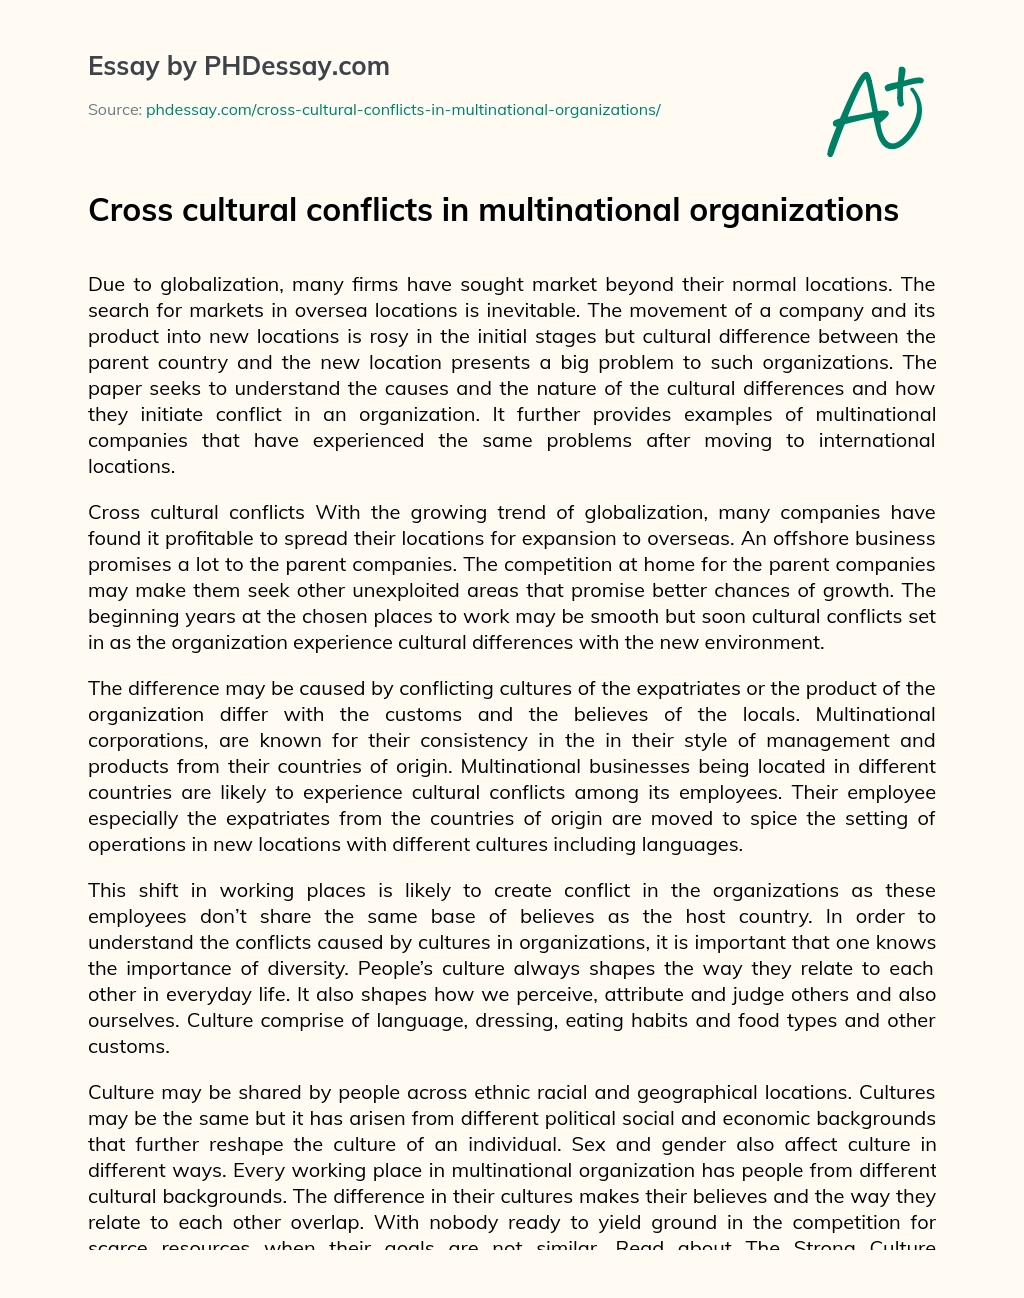 Cross cultural conflicts in multinational organizations essay